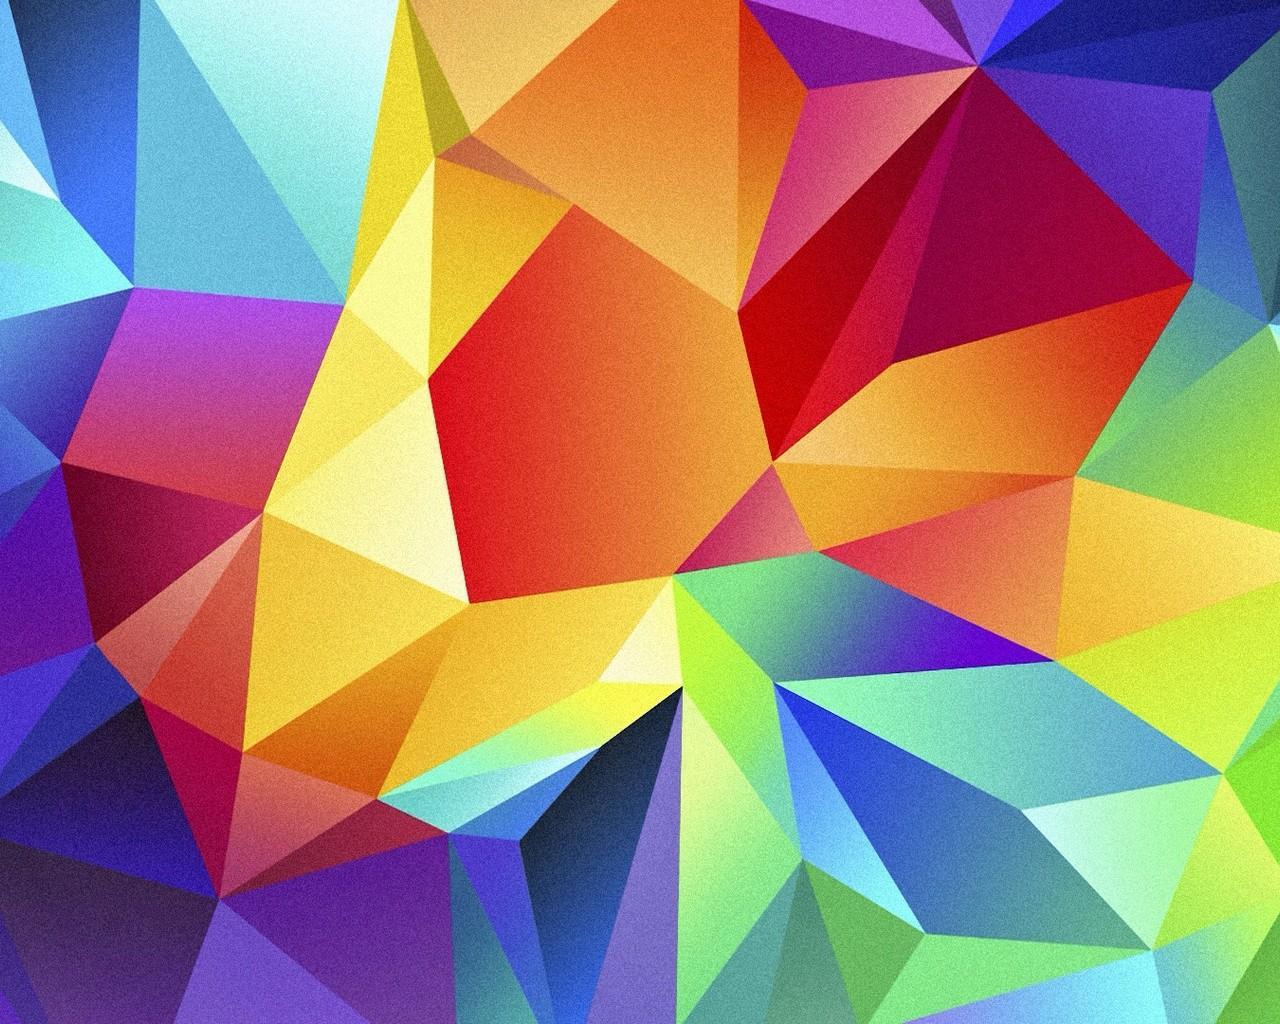 Cubic Patterns Live HD Wallpaper for Android